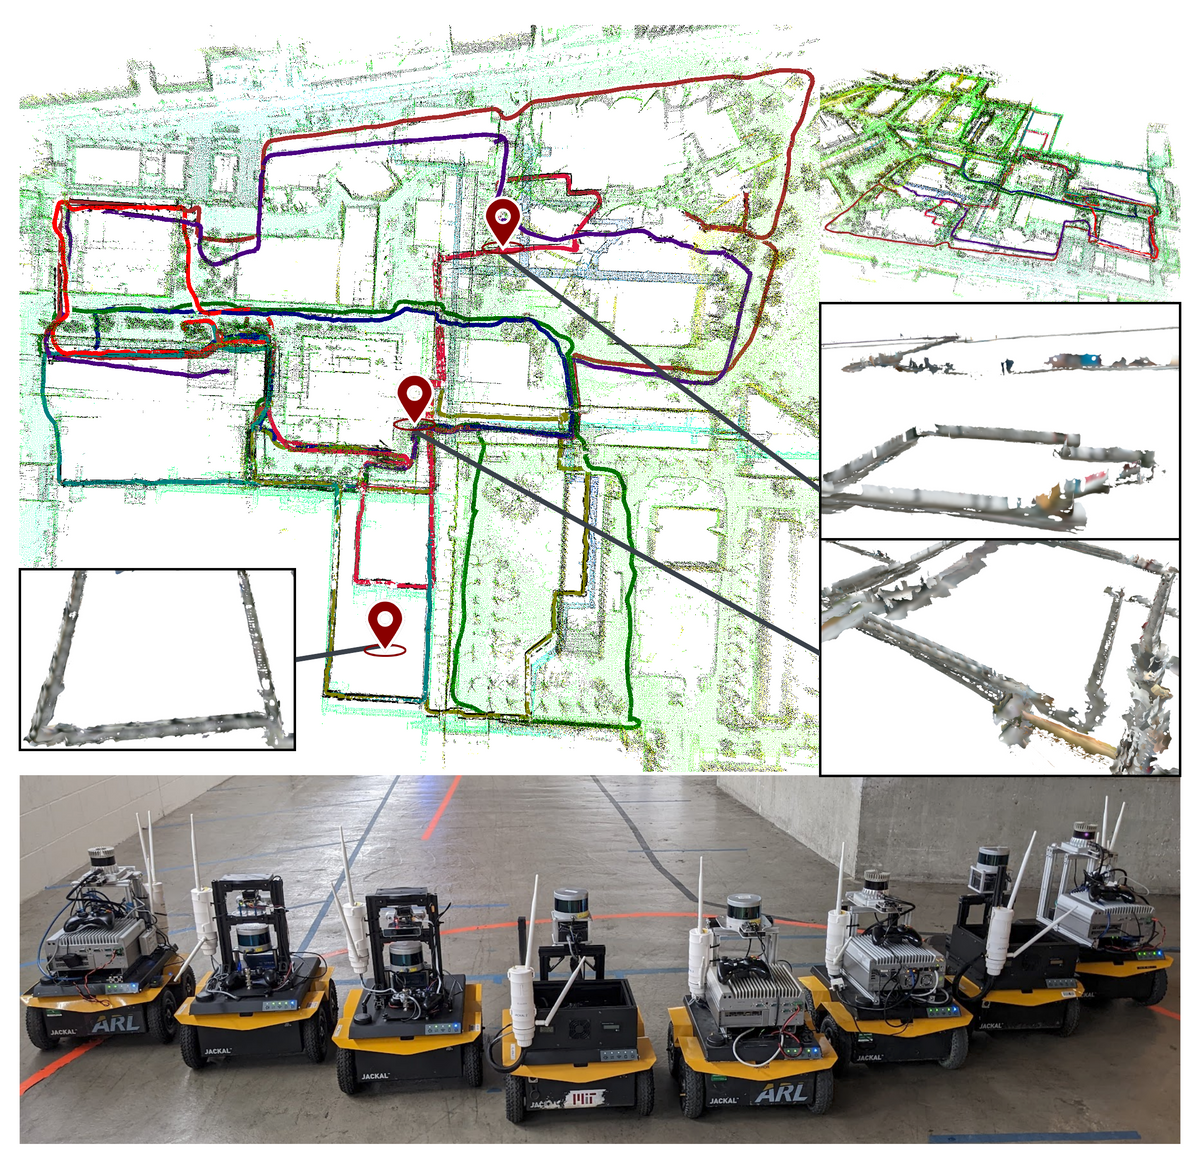 A photograph showing eight small wheeled yellow robots with sensors on them along with a graphic showing a map created by those robots.